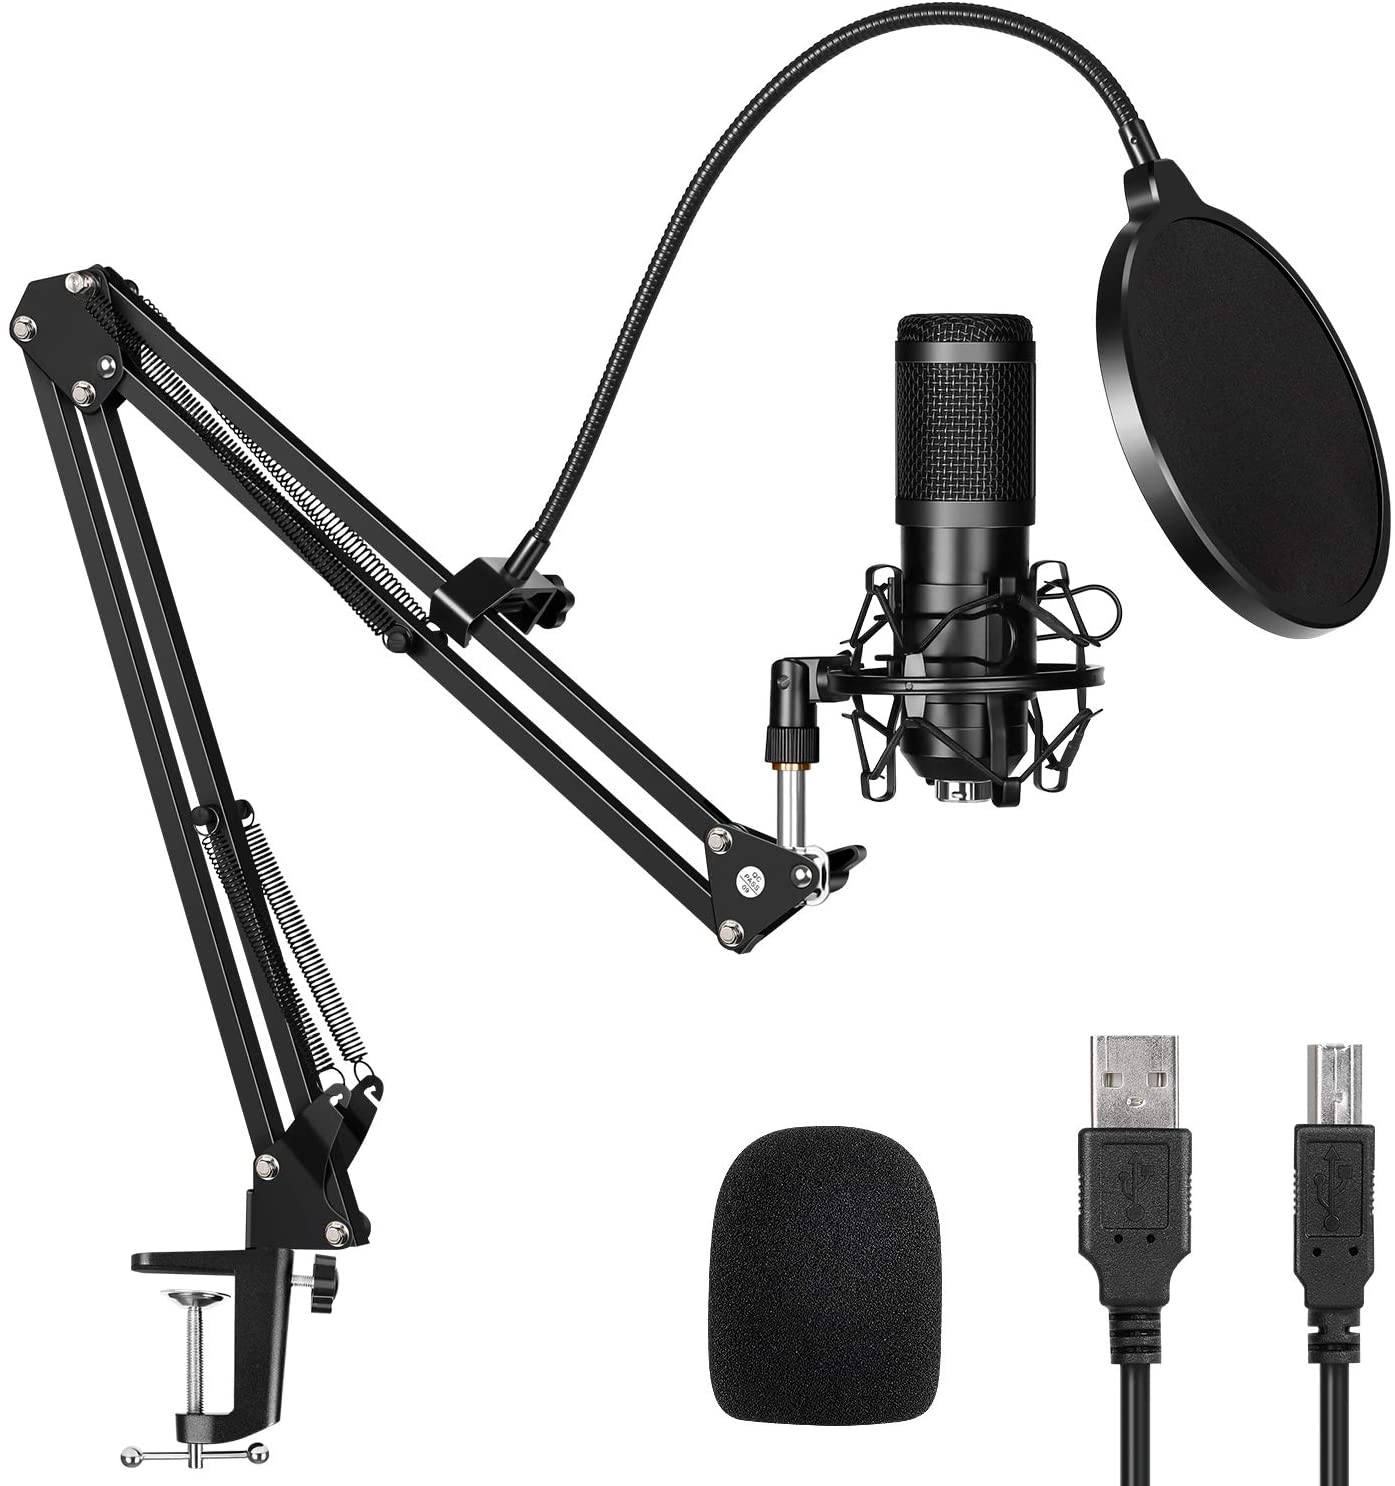 USB Condenser Microphone for Computer PC 192KHZ/24BIT Professional Cardioid Microphone Kit with Adjustable Scissor Arm Stand Shock Mount Pop Filter for Karaoke, YouTube, Gaming Recording - image 1 of 8